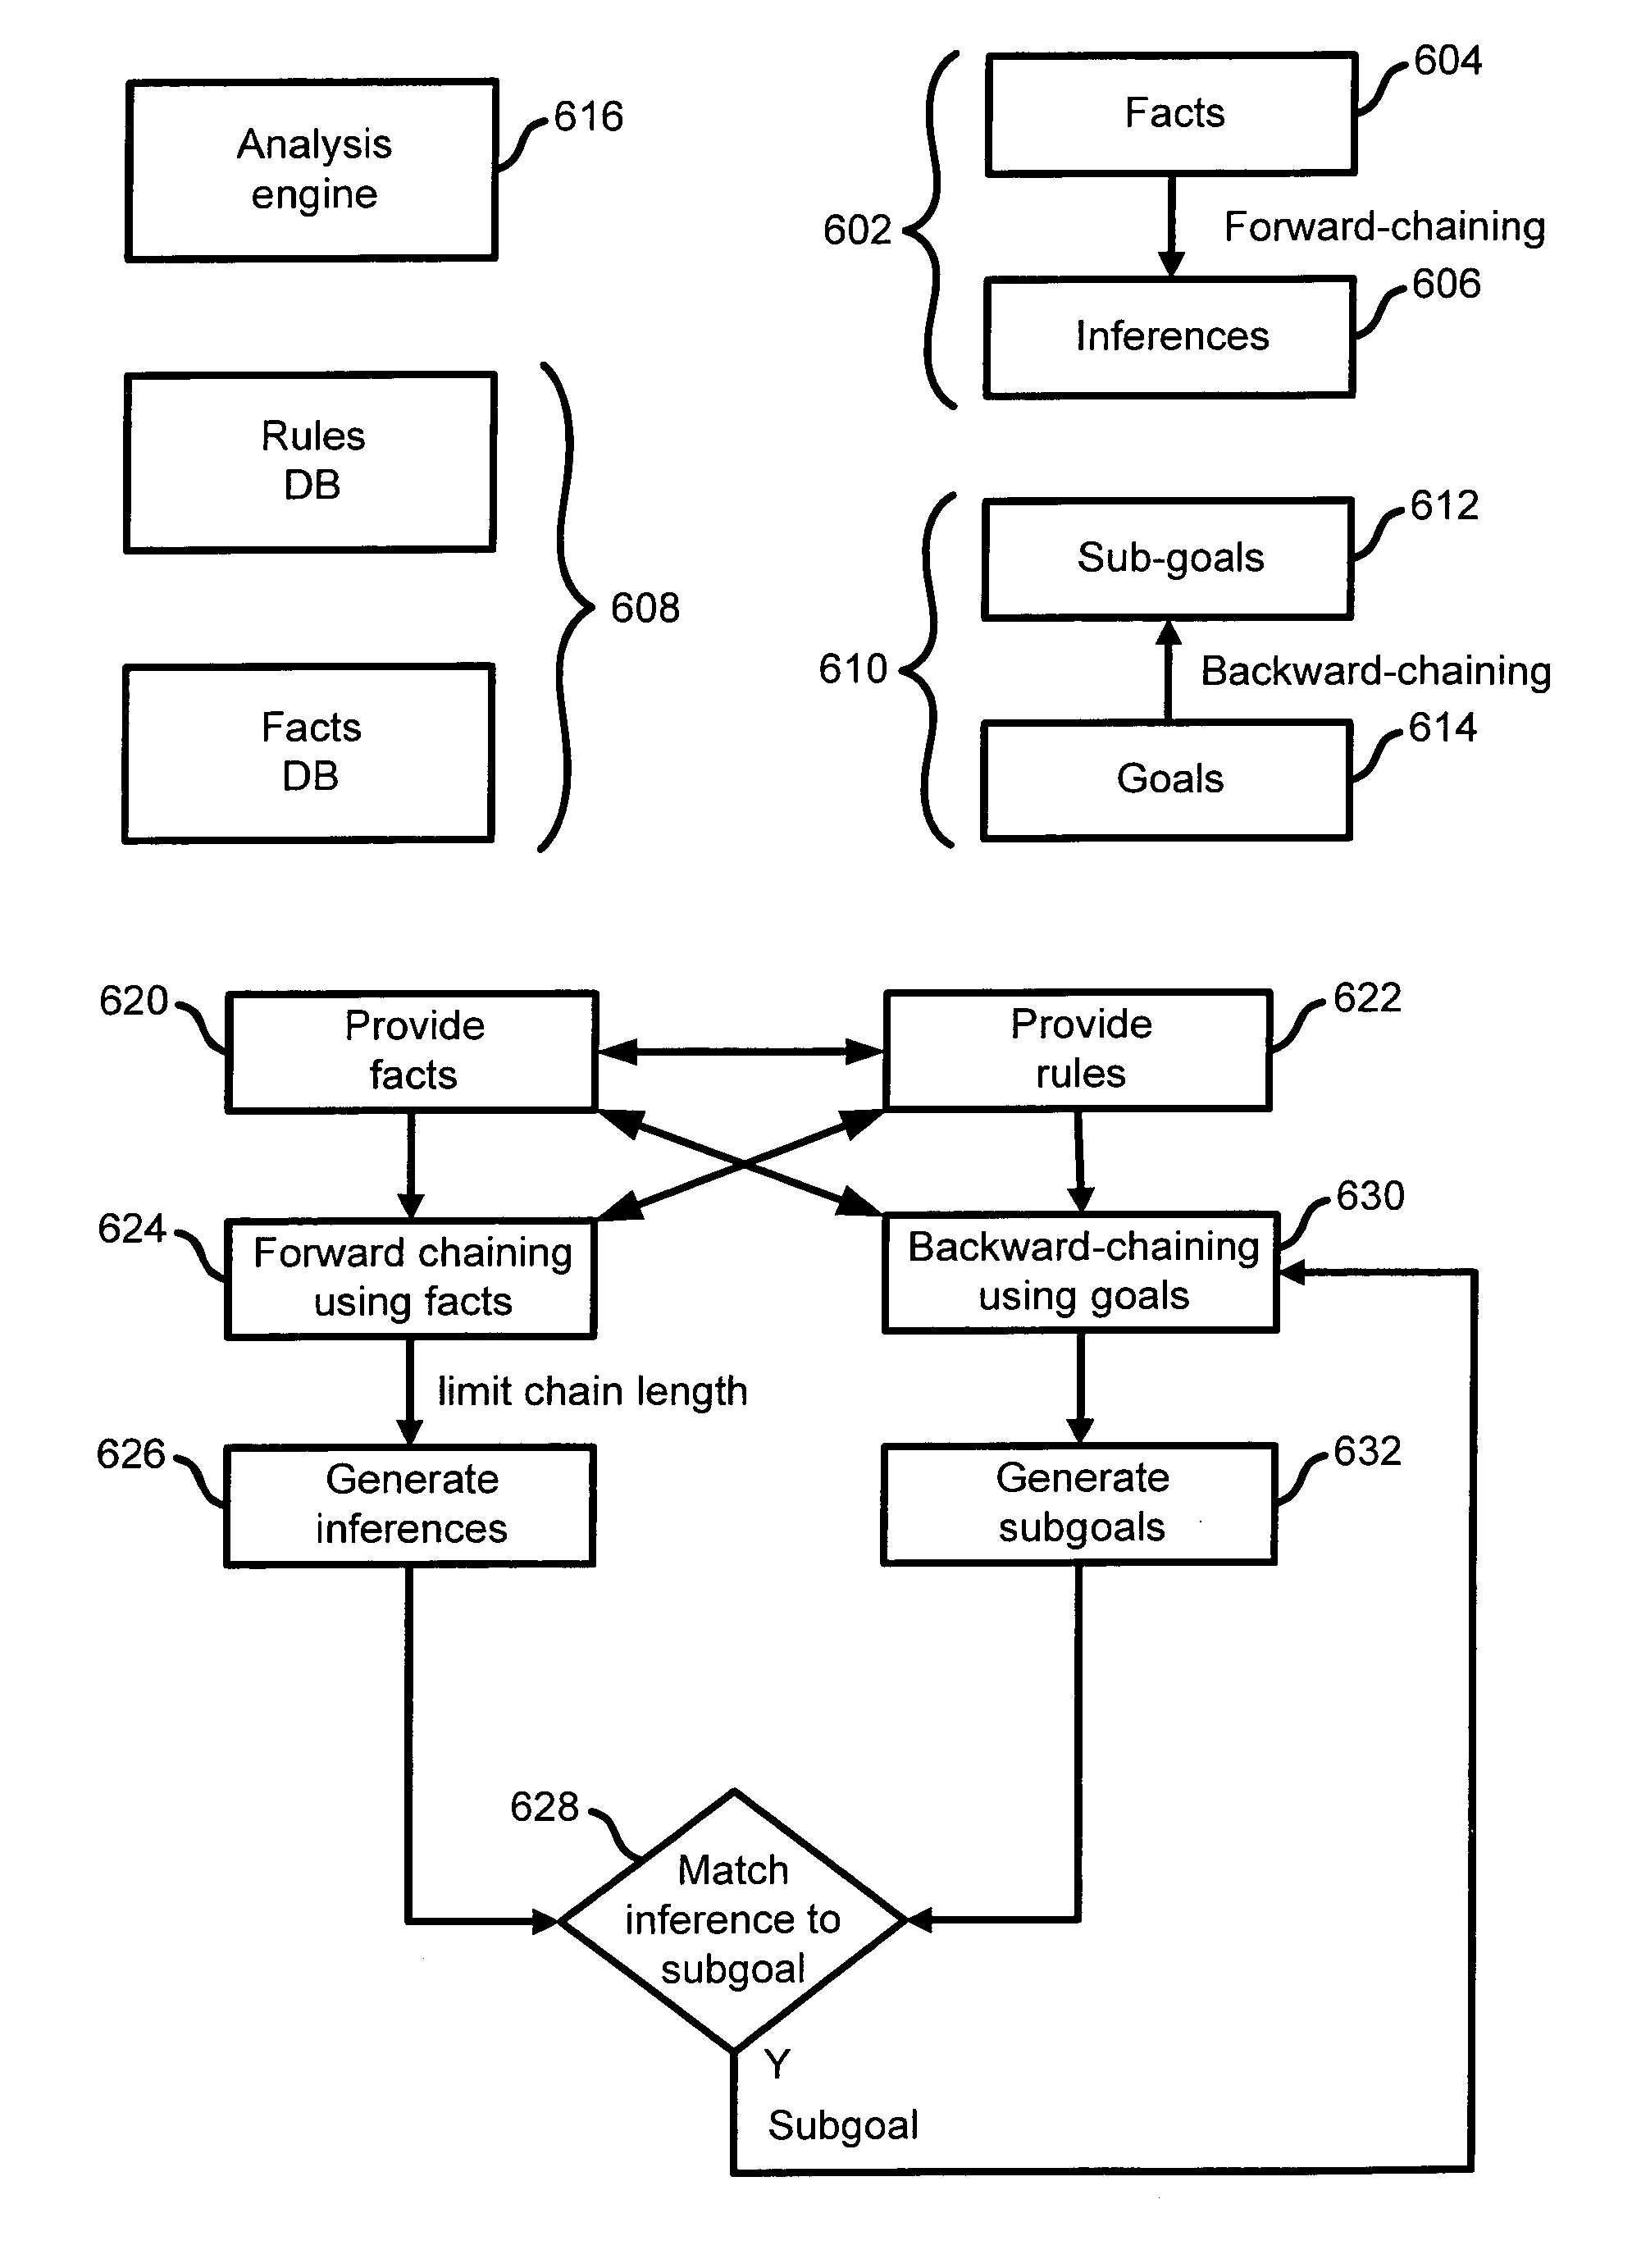 System and method for detecting computer intrusions